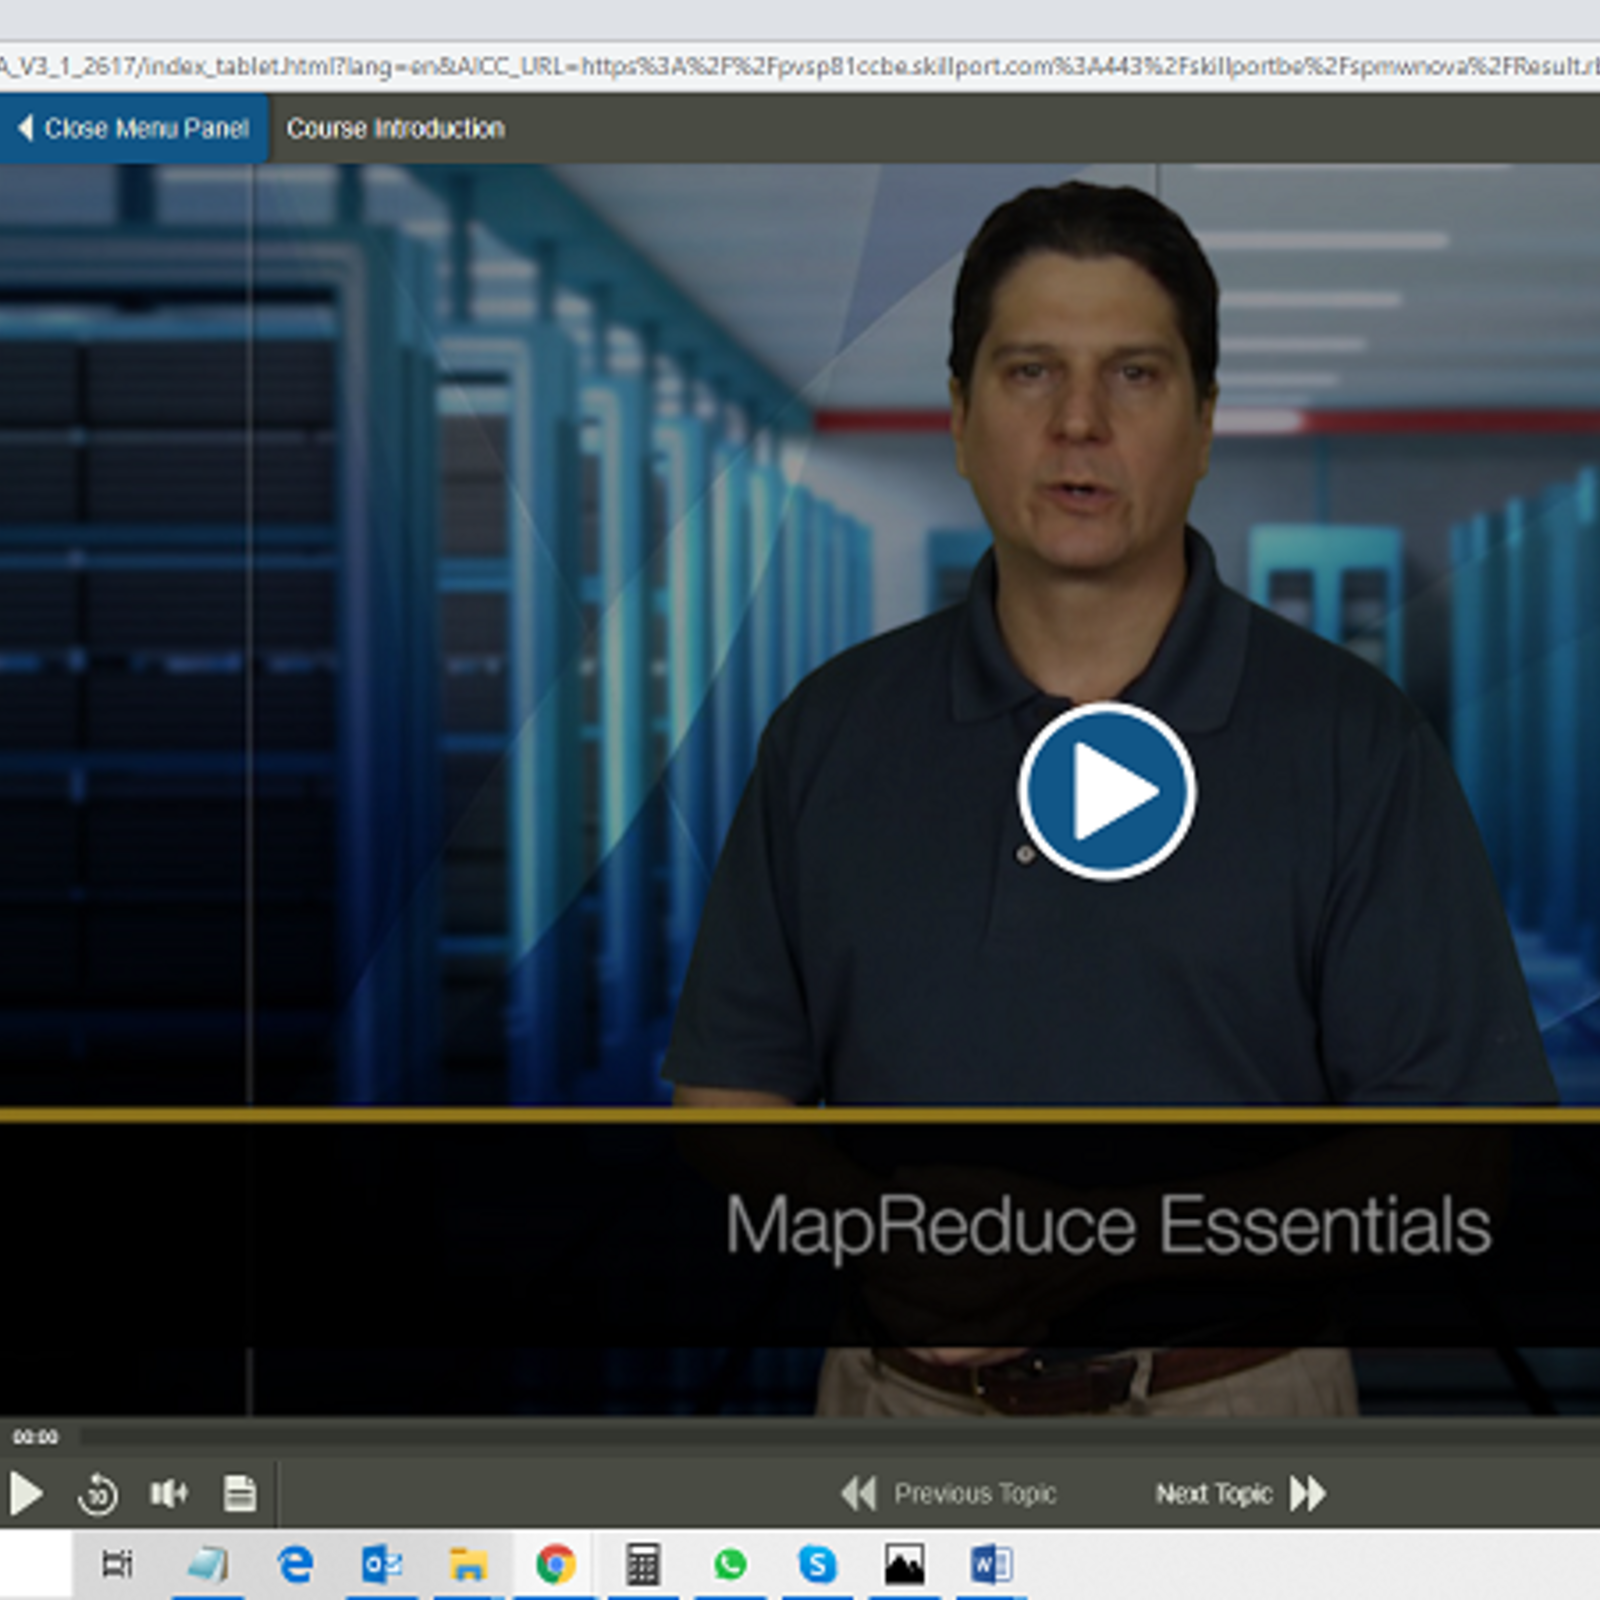 Data Science Apache Hadoop and MapReduce Essentials E-Learning Kurs